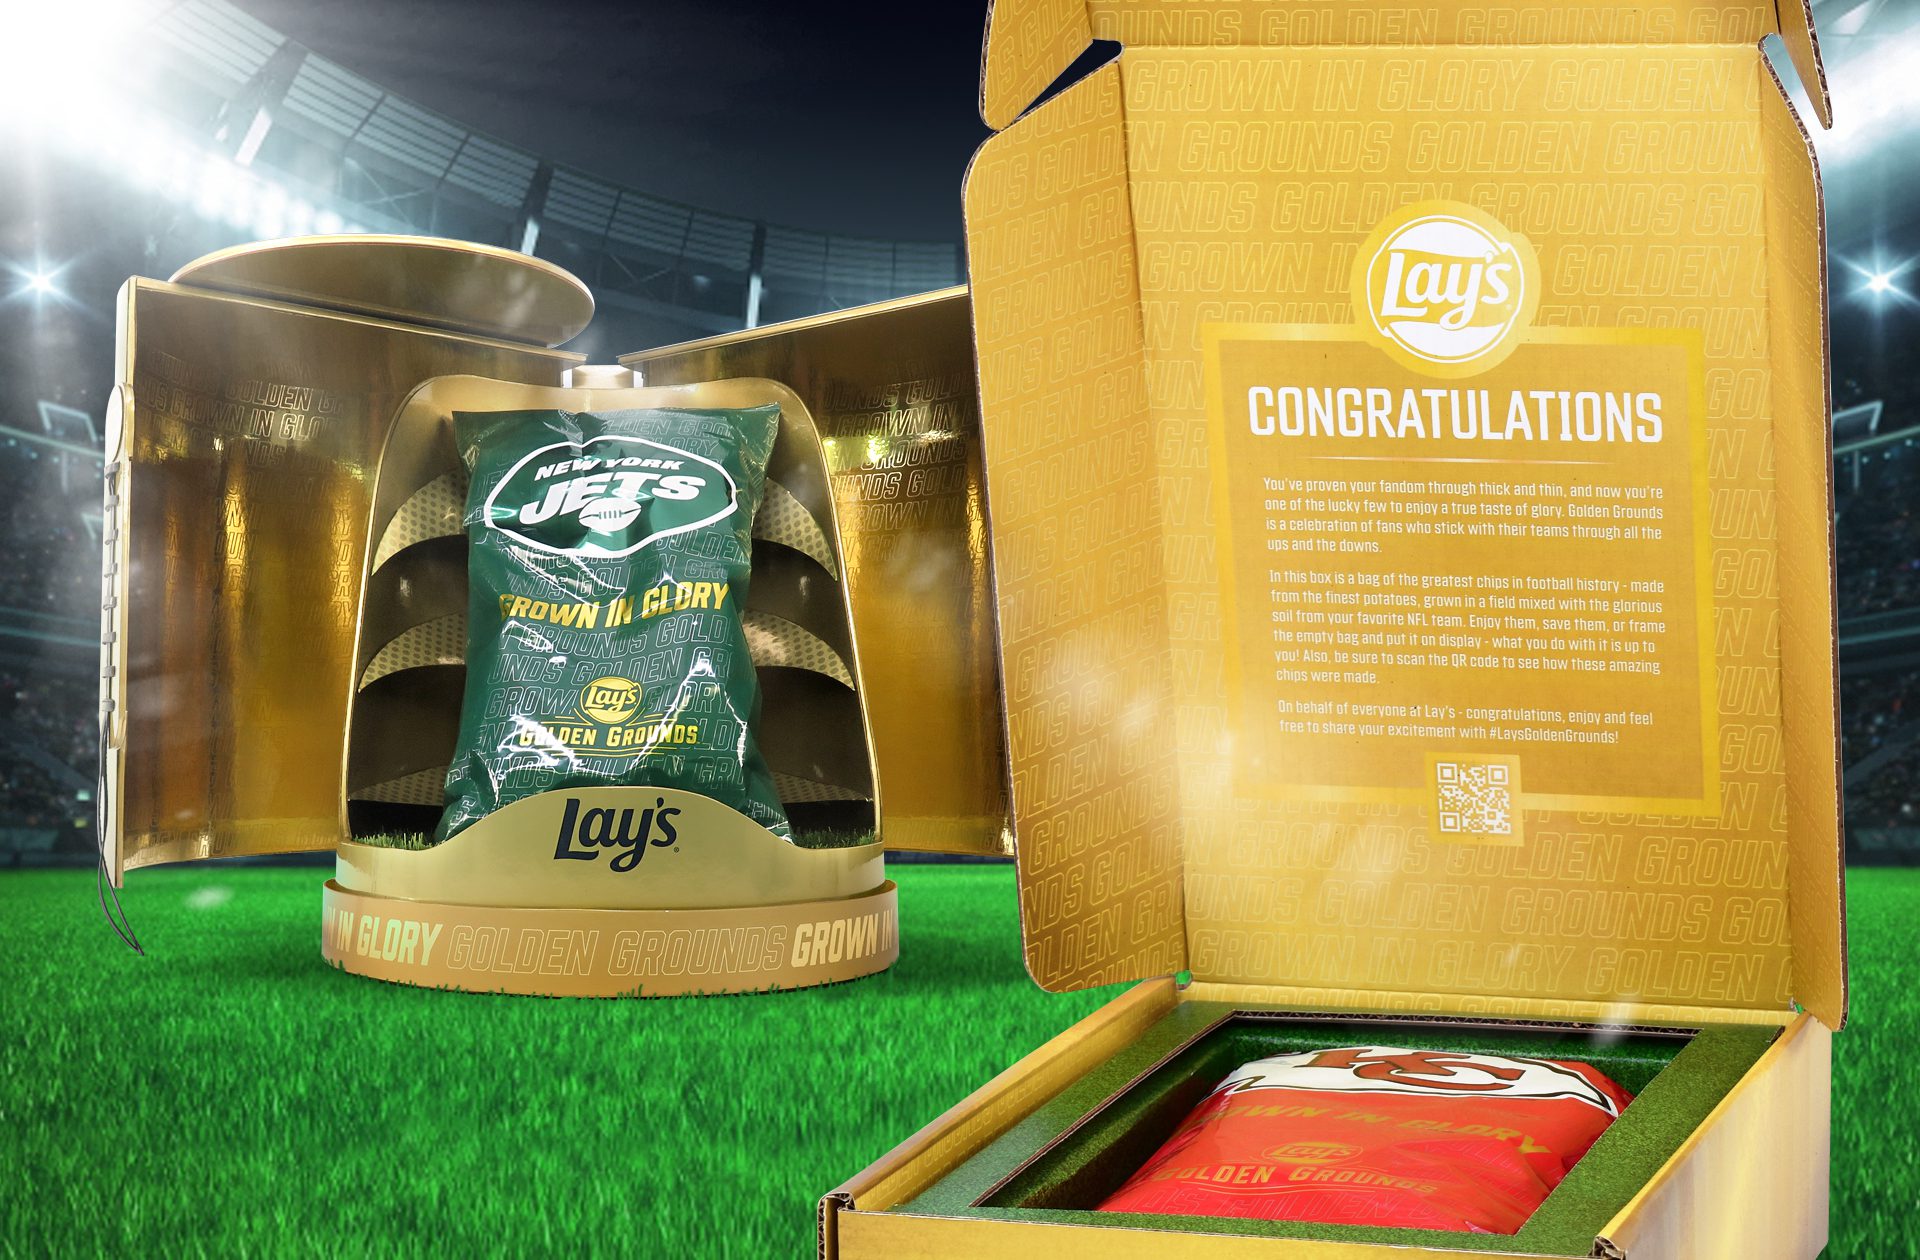 Render a consumer sweepstake prize box and an influencer unboxing experience for Lays Golden Grounds, both opening up to reveal different bags of Lays with limited edition packaging themed around an NFL team.